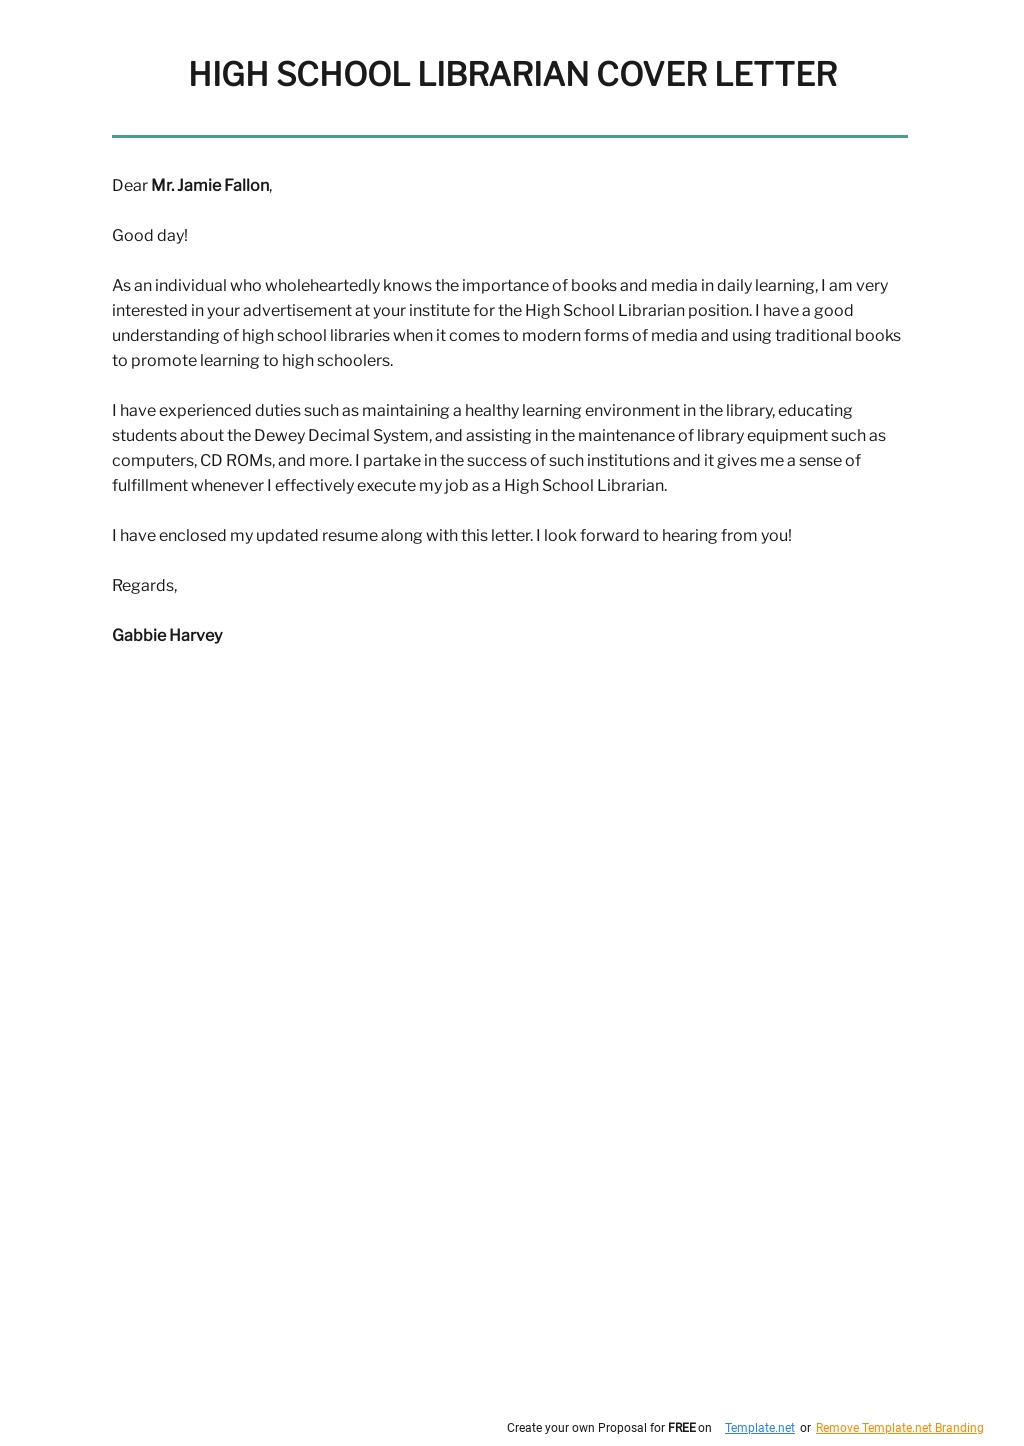 Free High School Librarian Cover Letter Template.jpe